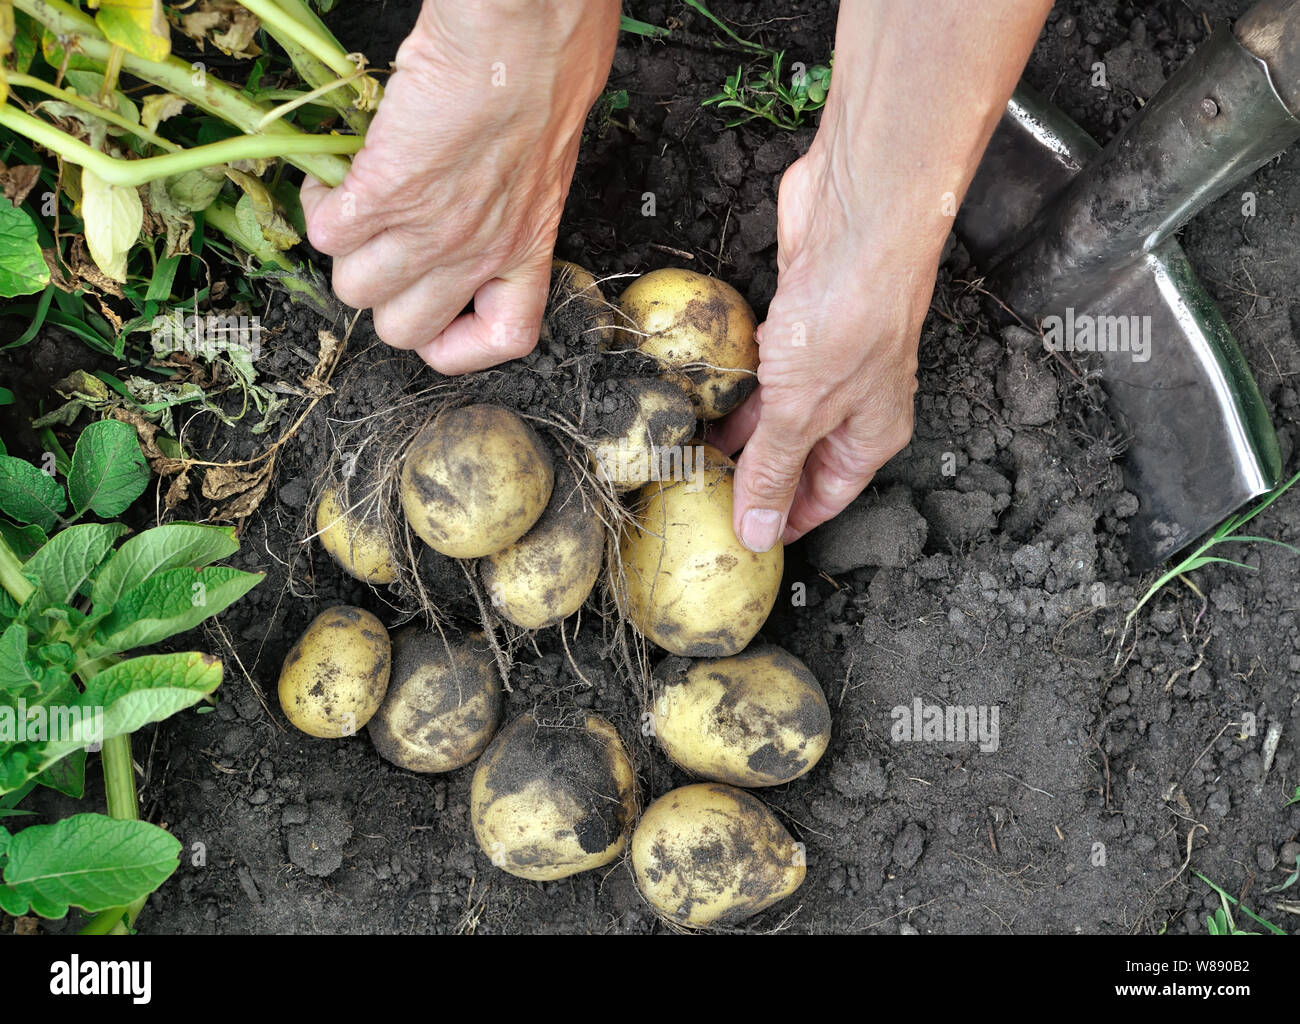 gardener's hands picking fresh organic potatoes in the field, view from above Stock Photo